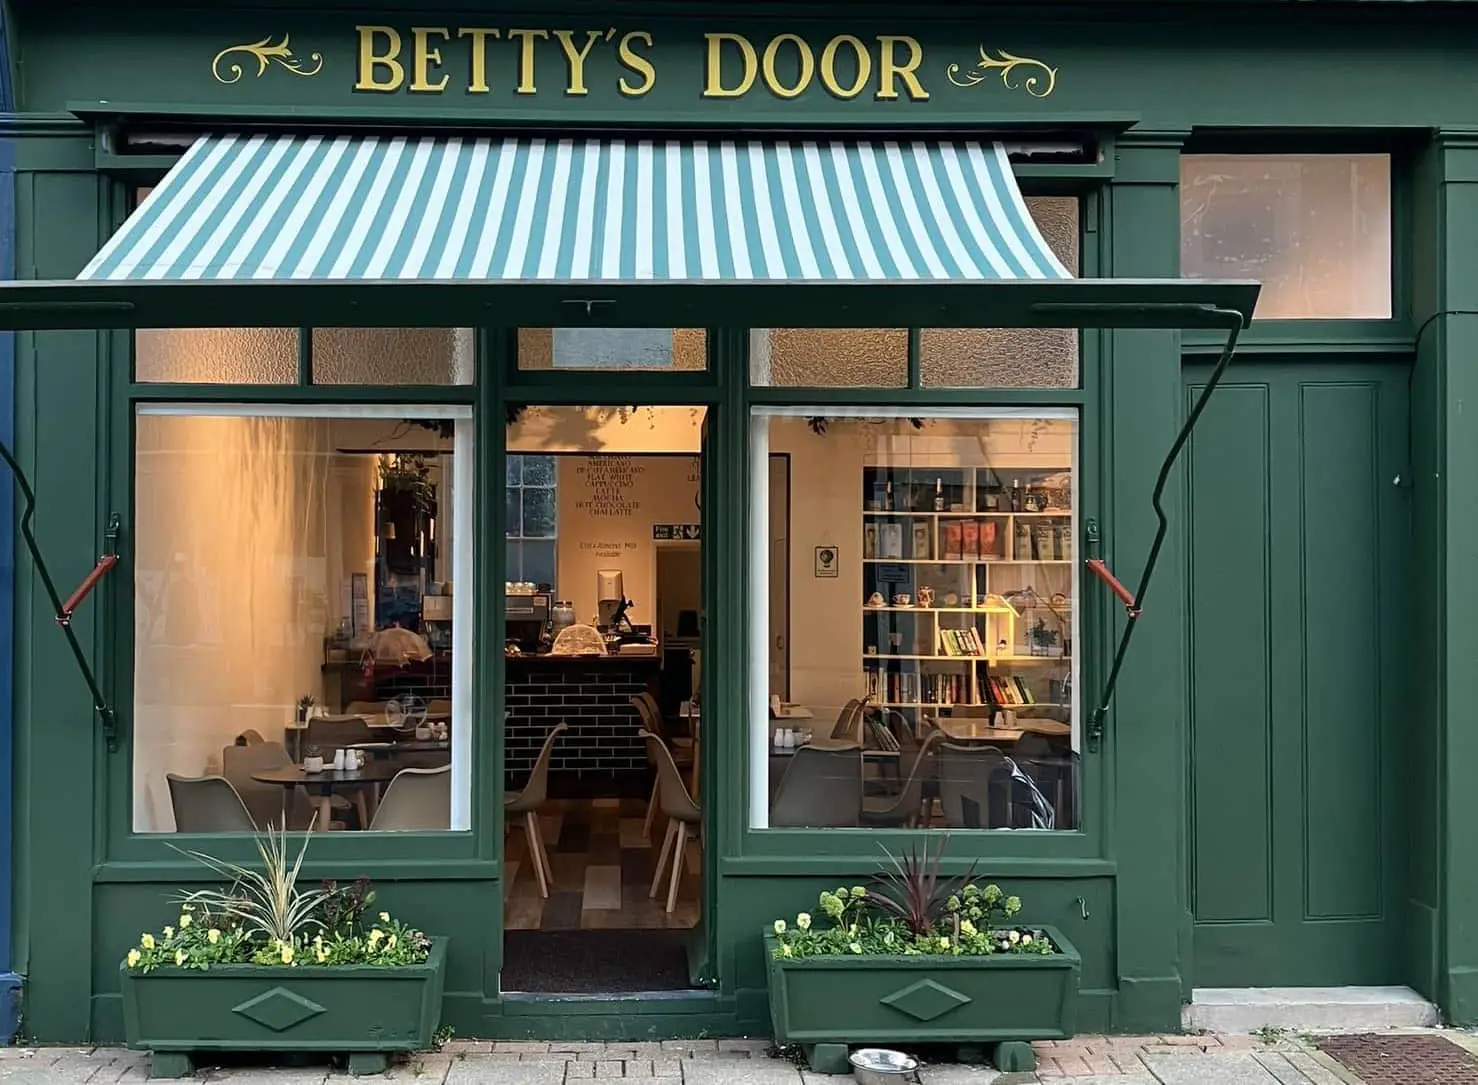 Betty's Door from the outside